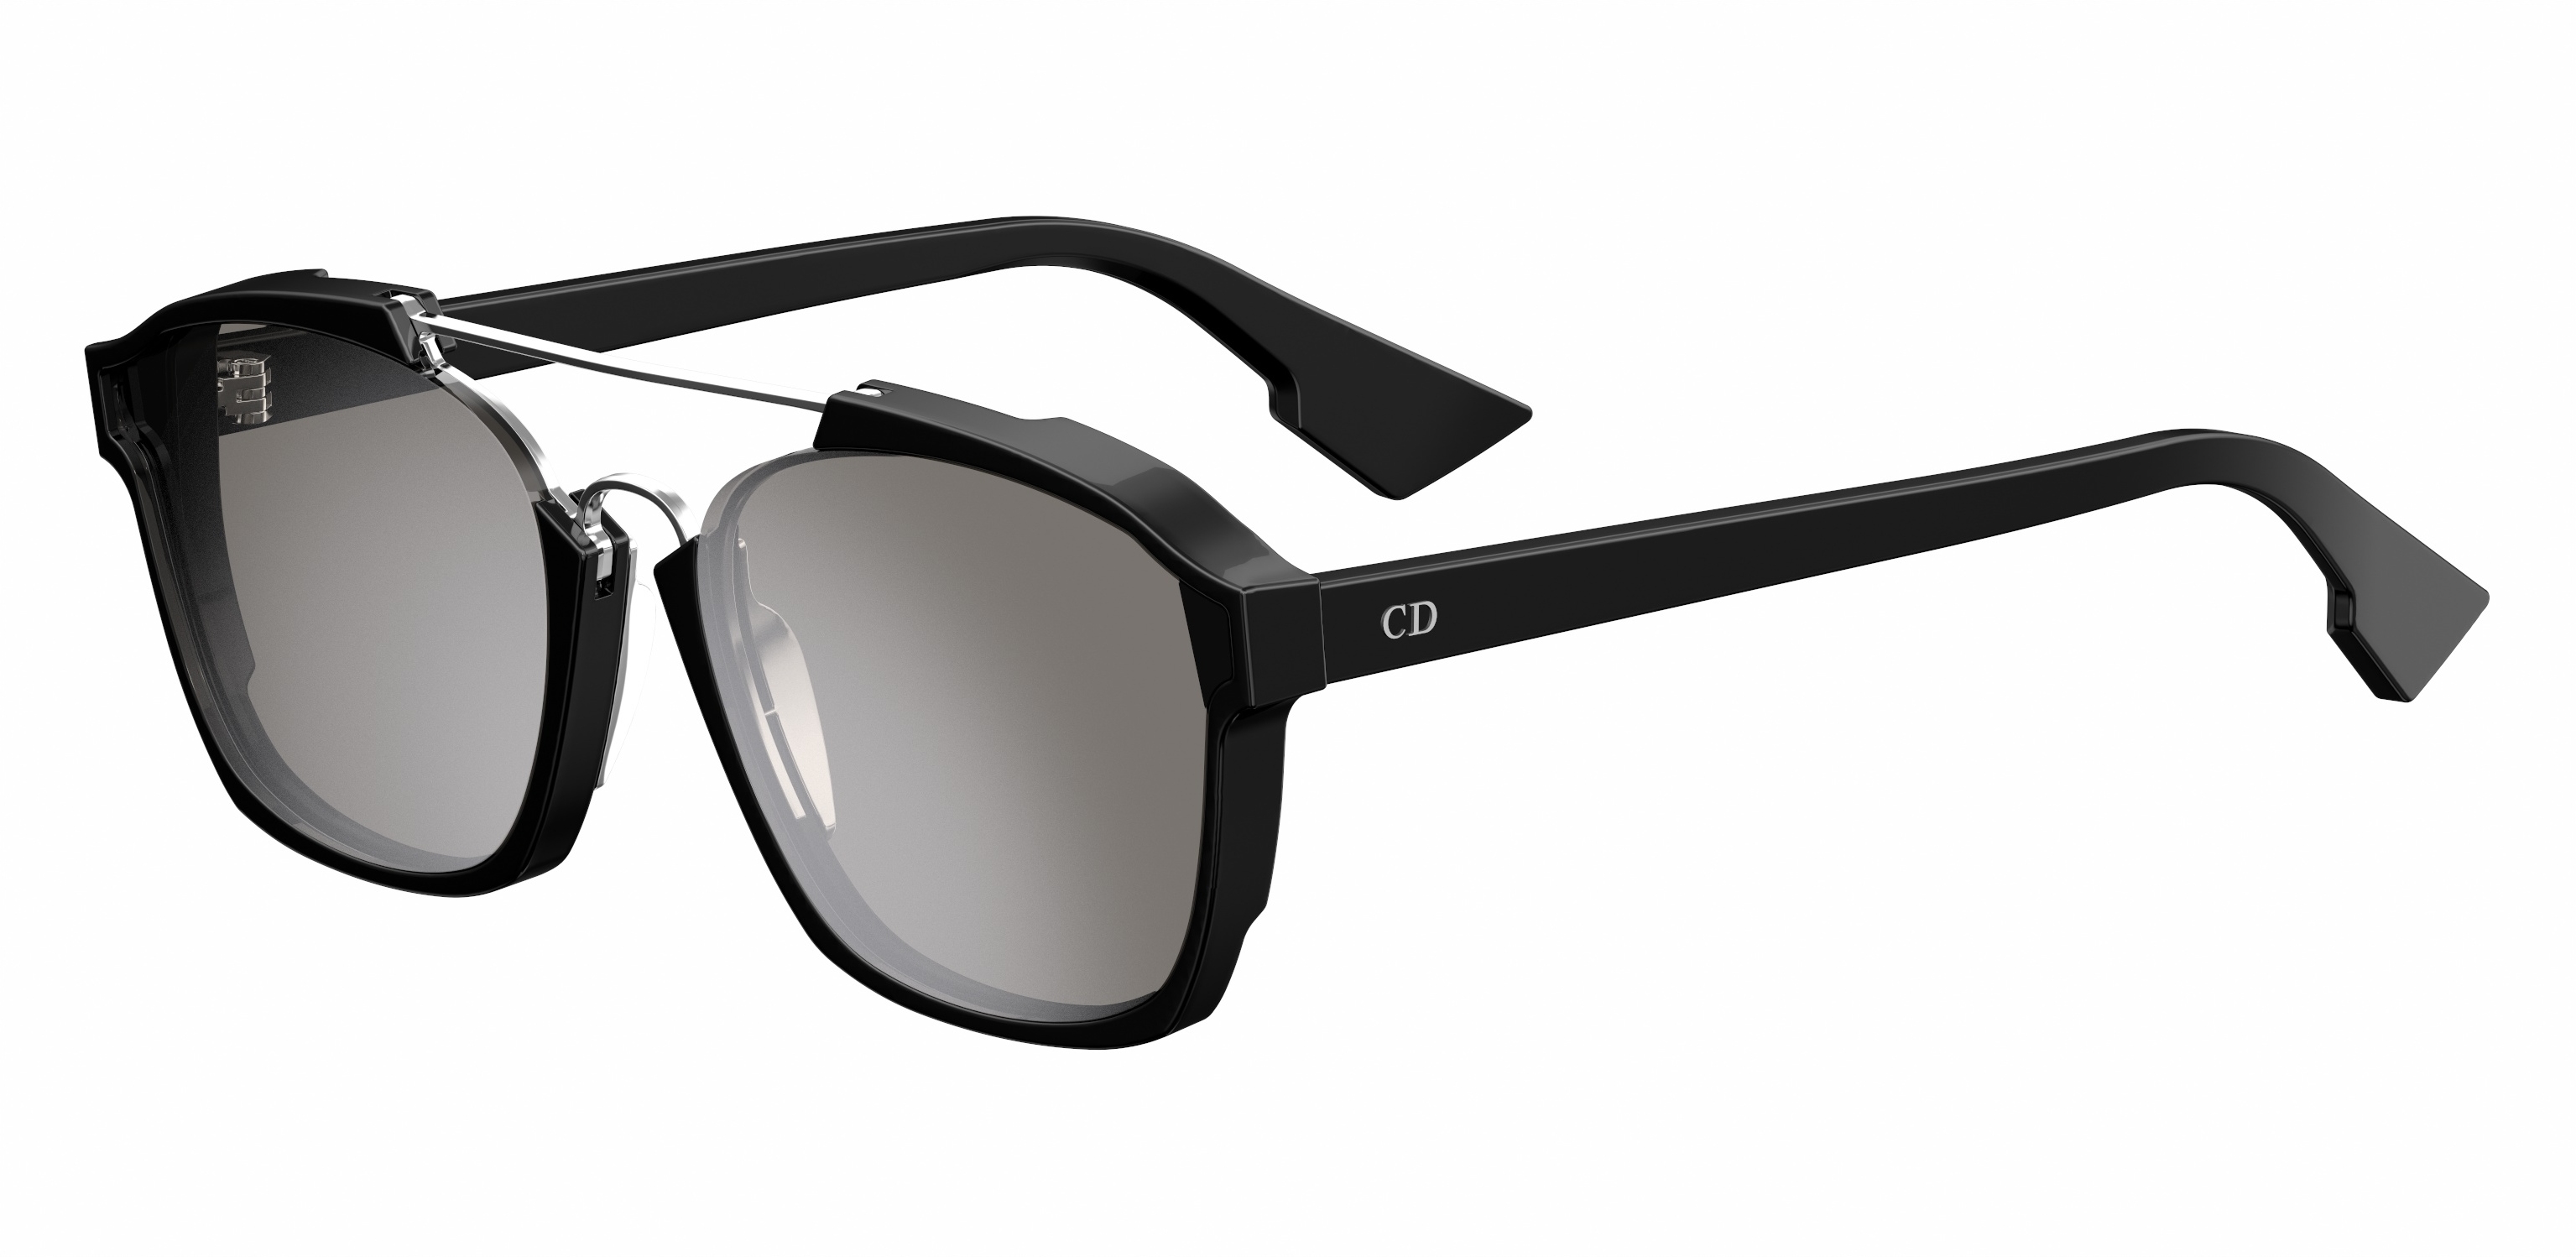 Sunglasses Dior Abstract 807 0T 